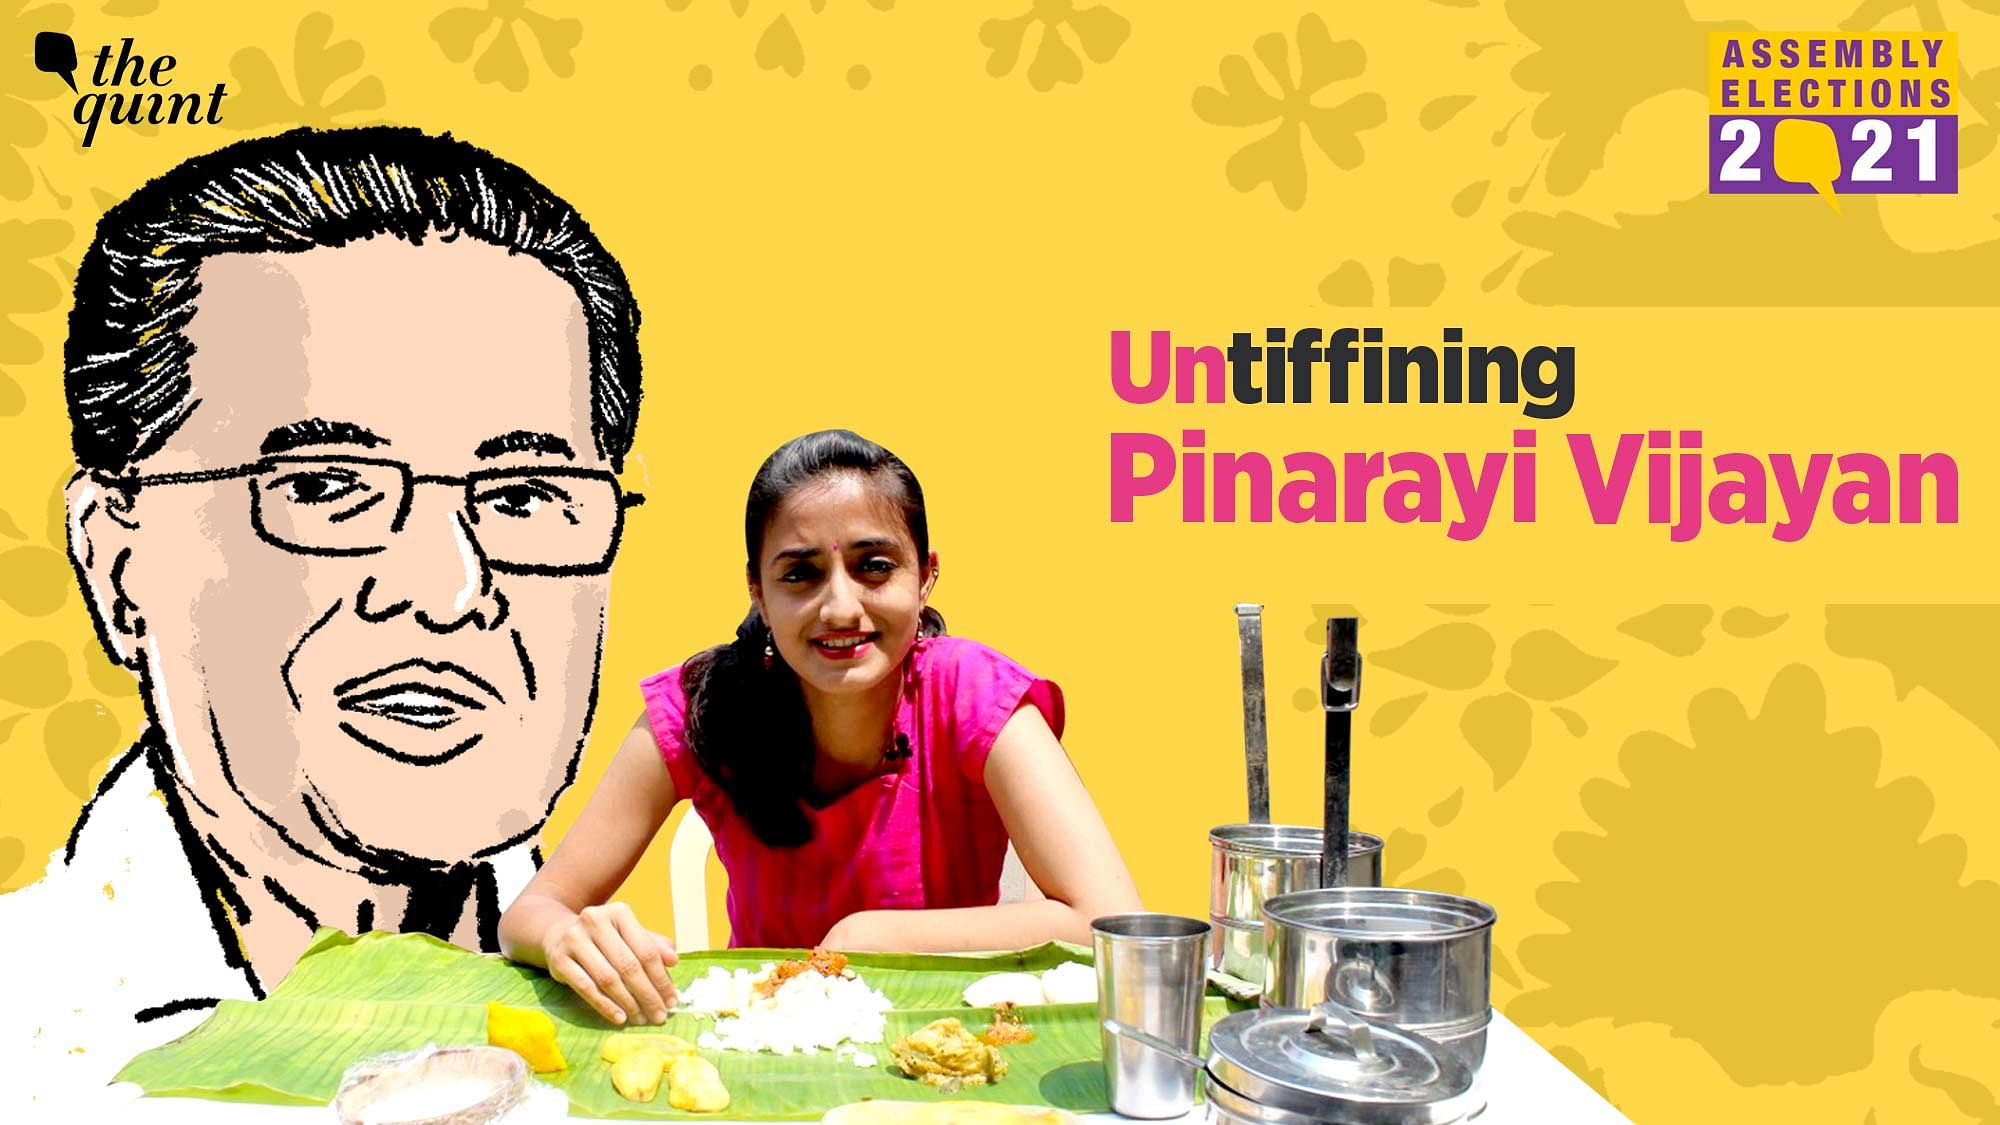 The Quint ‘untiffins’ the Communist leader Pinarayi Vijayan, his party ideology and political ambitions.